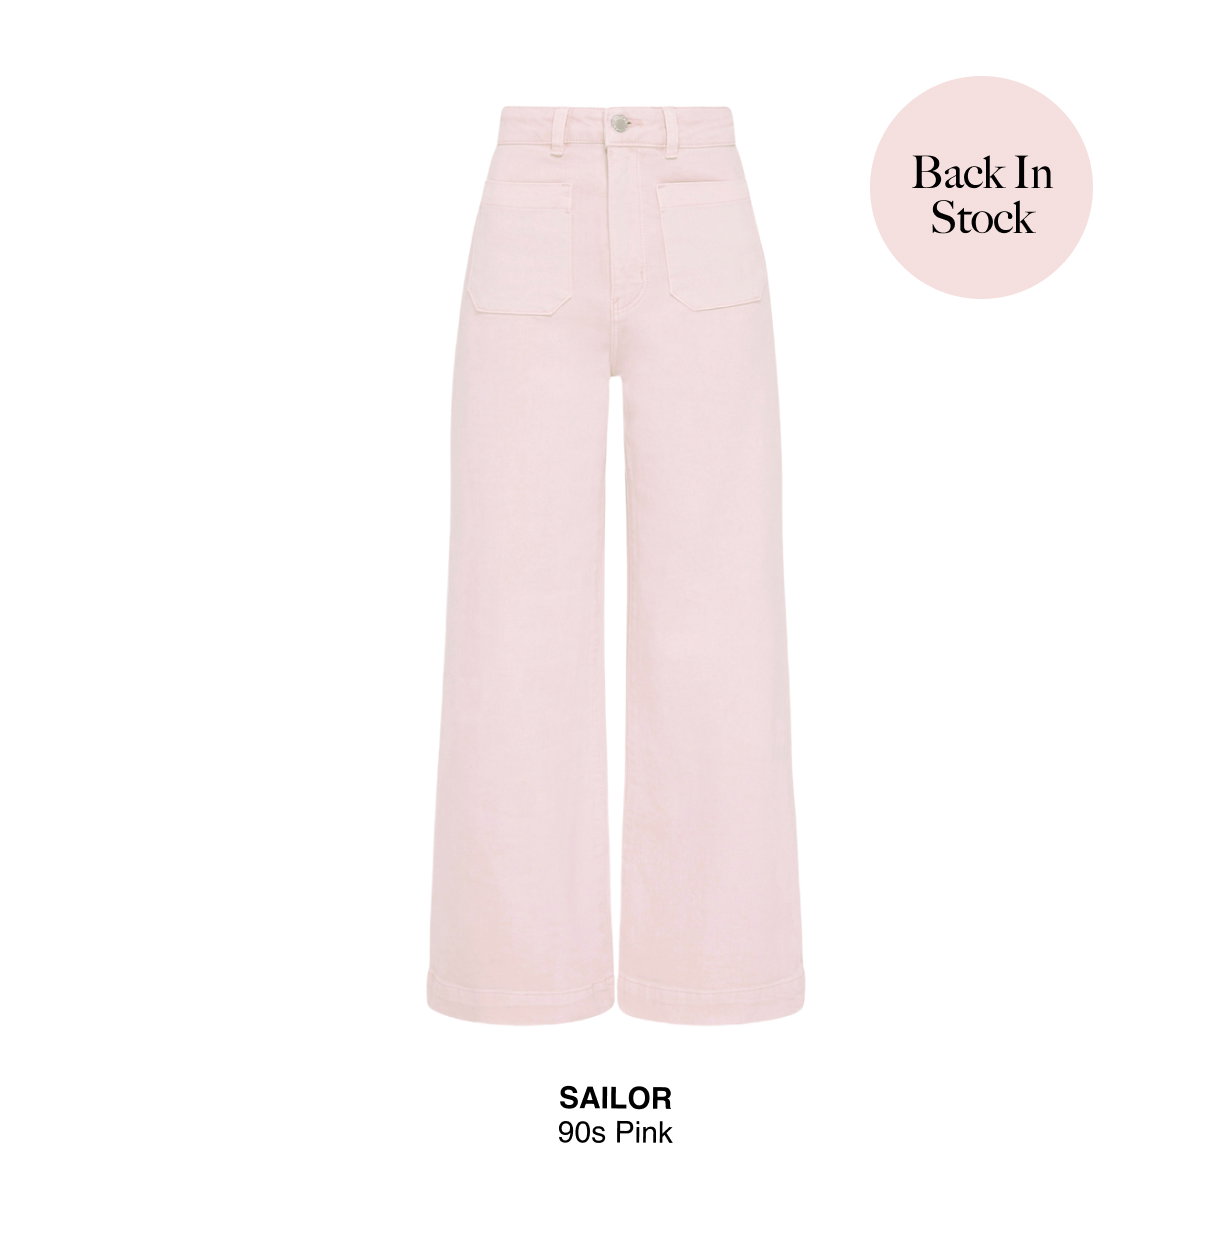 ROLLAS Womens Sailor Jean - 90's Pink